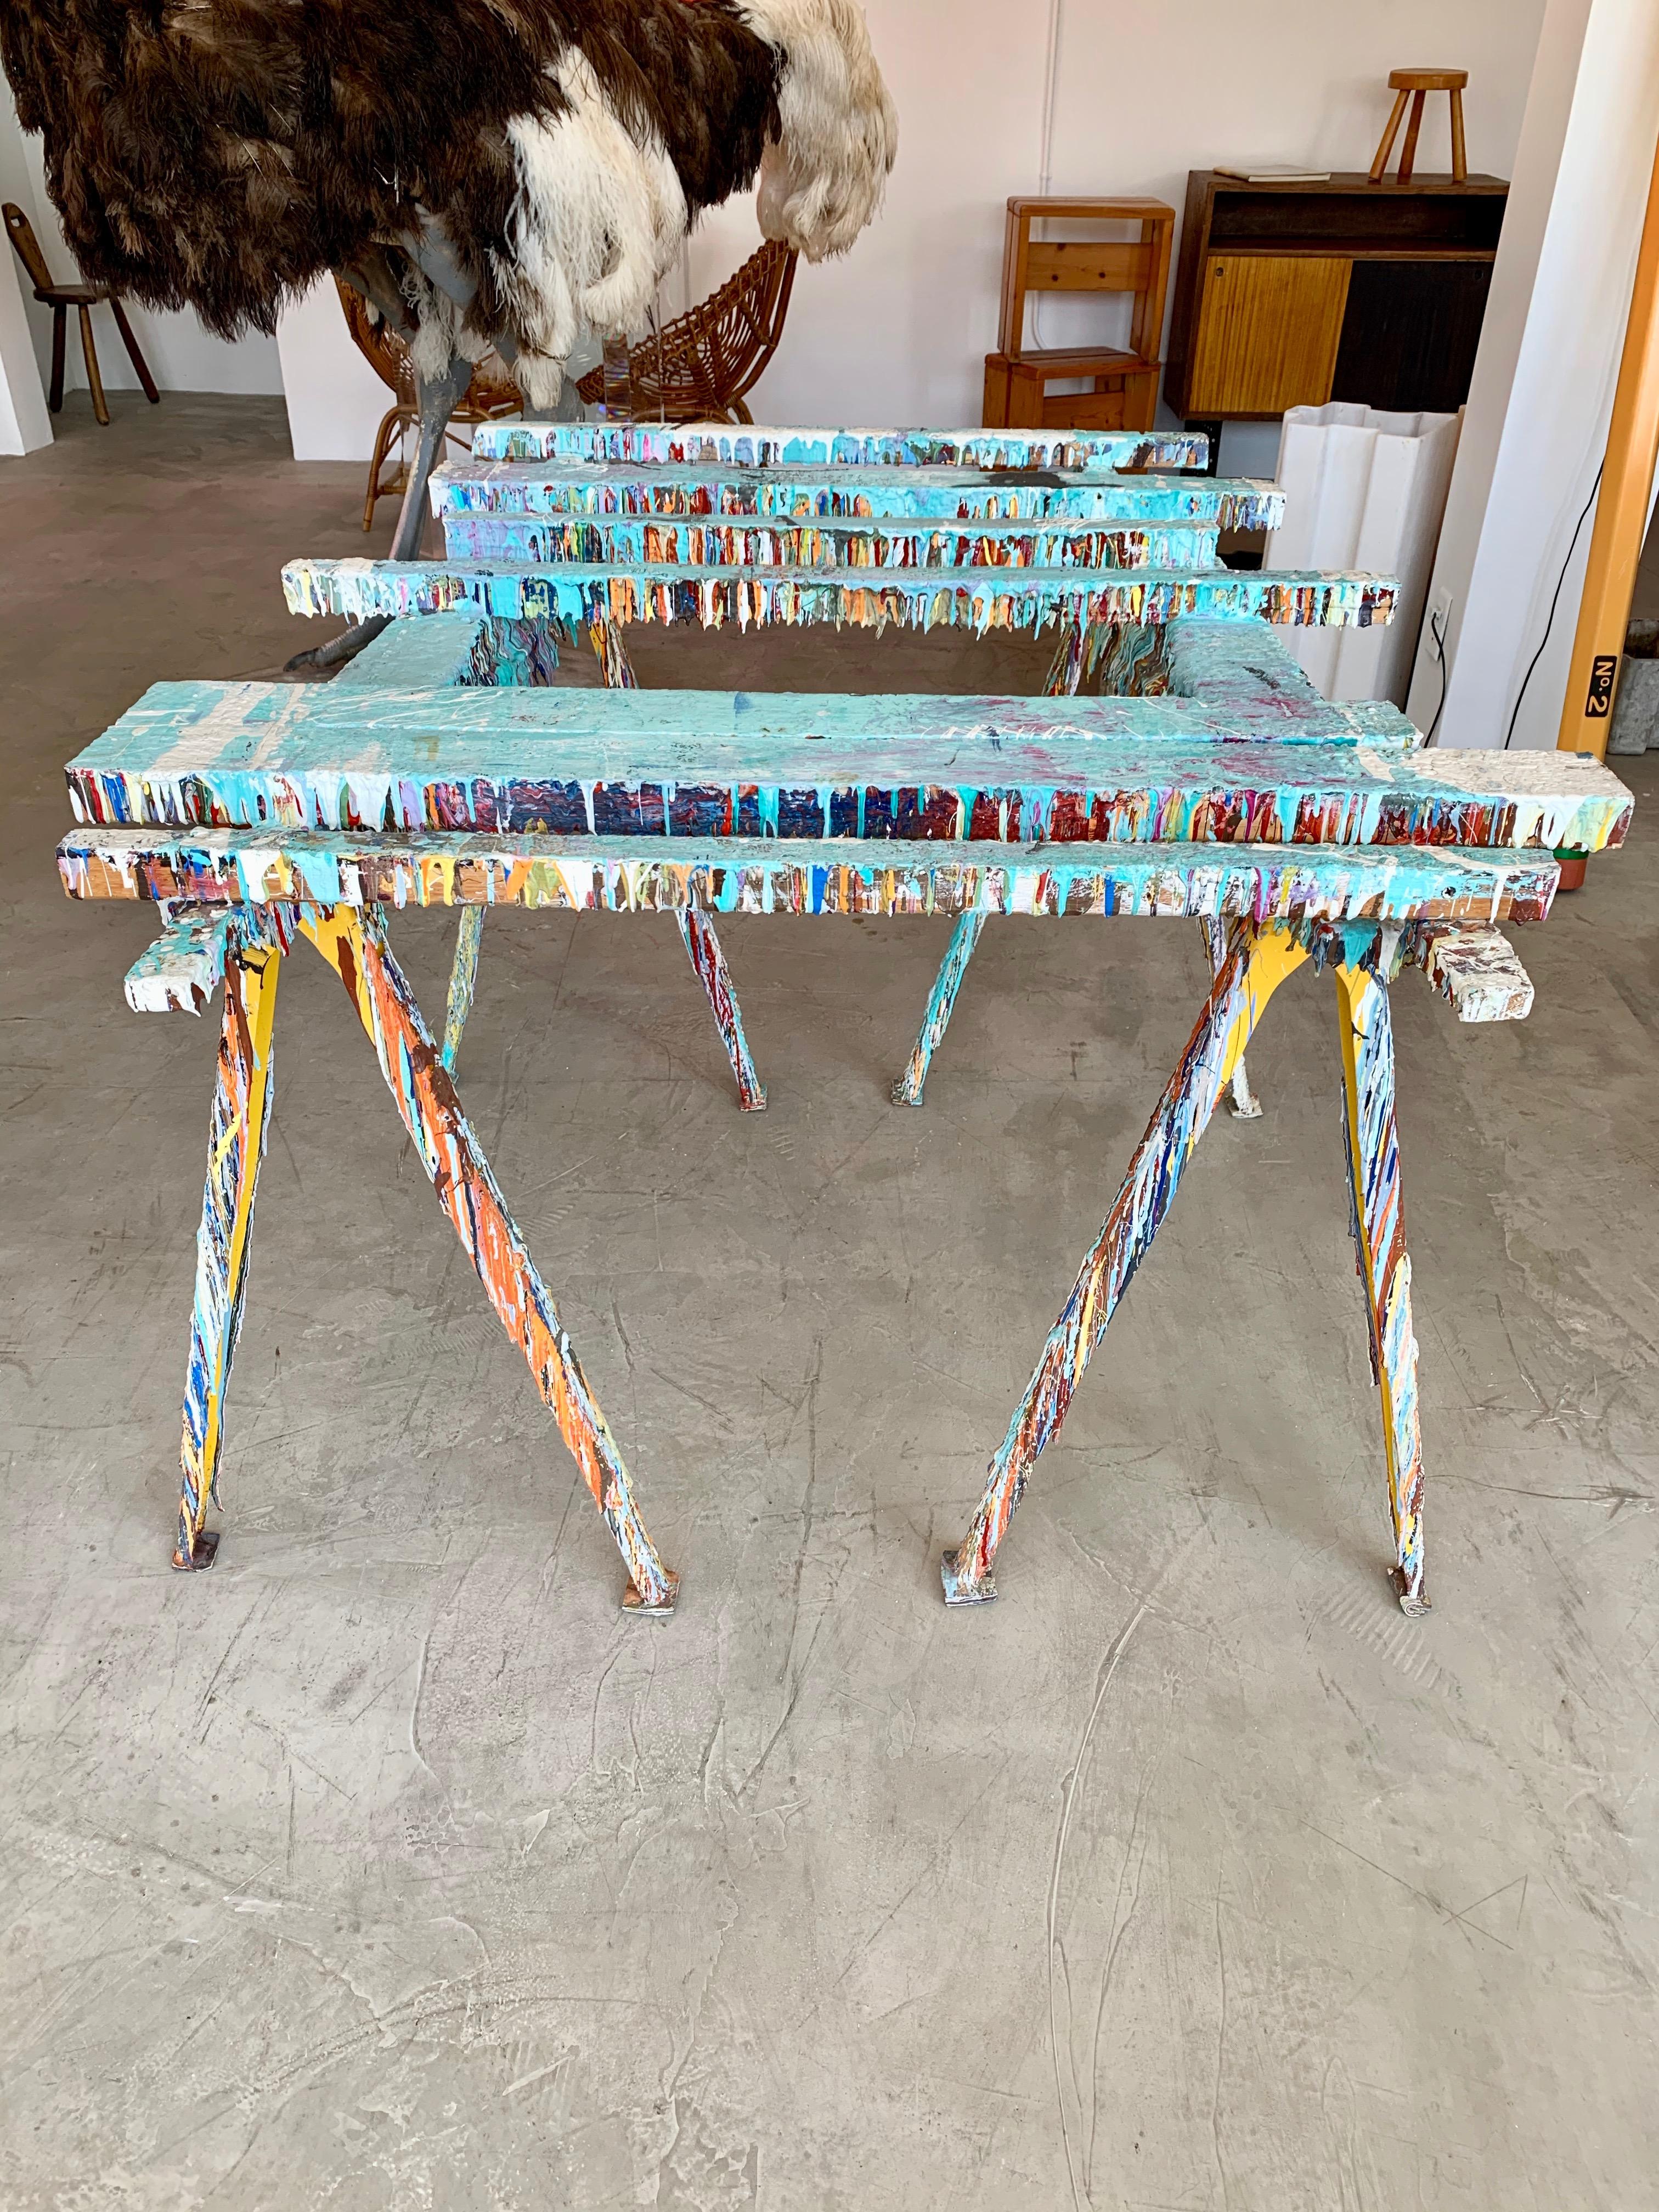 Fantastic table in the style of Gaetano Pesce. Wood saw house table with horizontal slats and folding metal legs. Entire table frame and legs covered in drip paint. Super cool piece of art. Glass tabletop with desired dimensions included in sale.